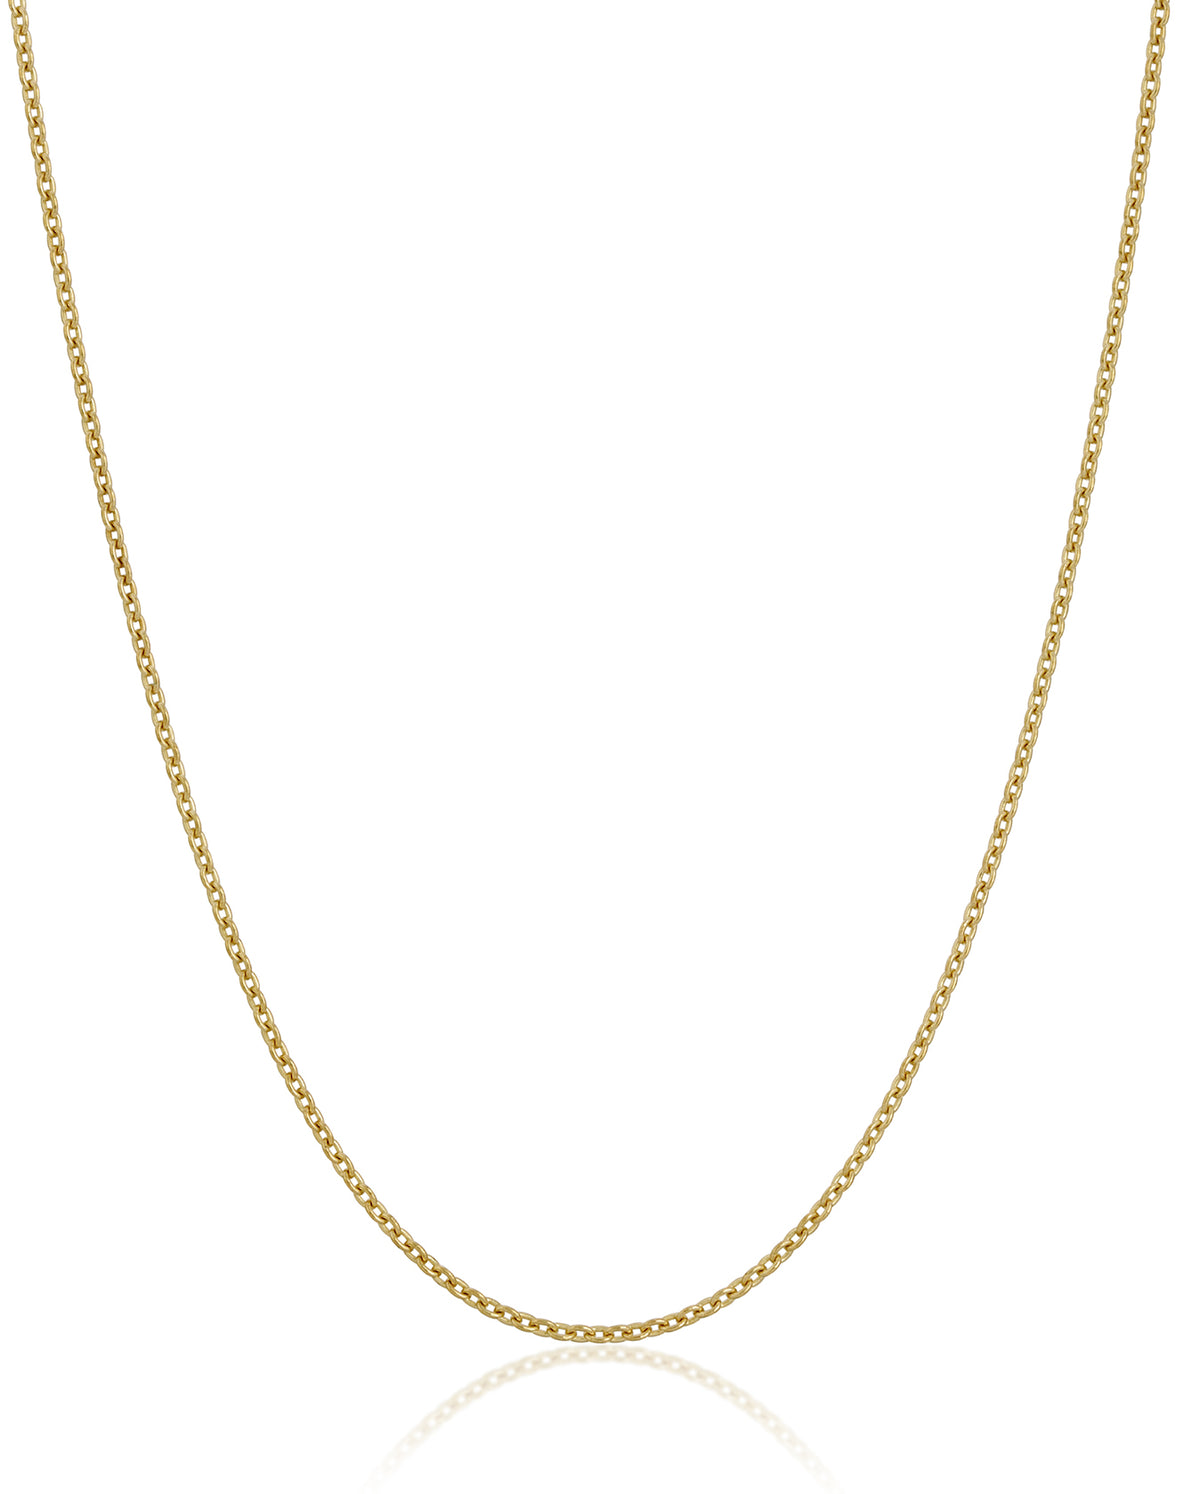 14K Gold Cable Chain Necklace - 24"